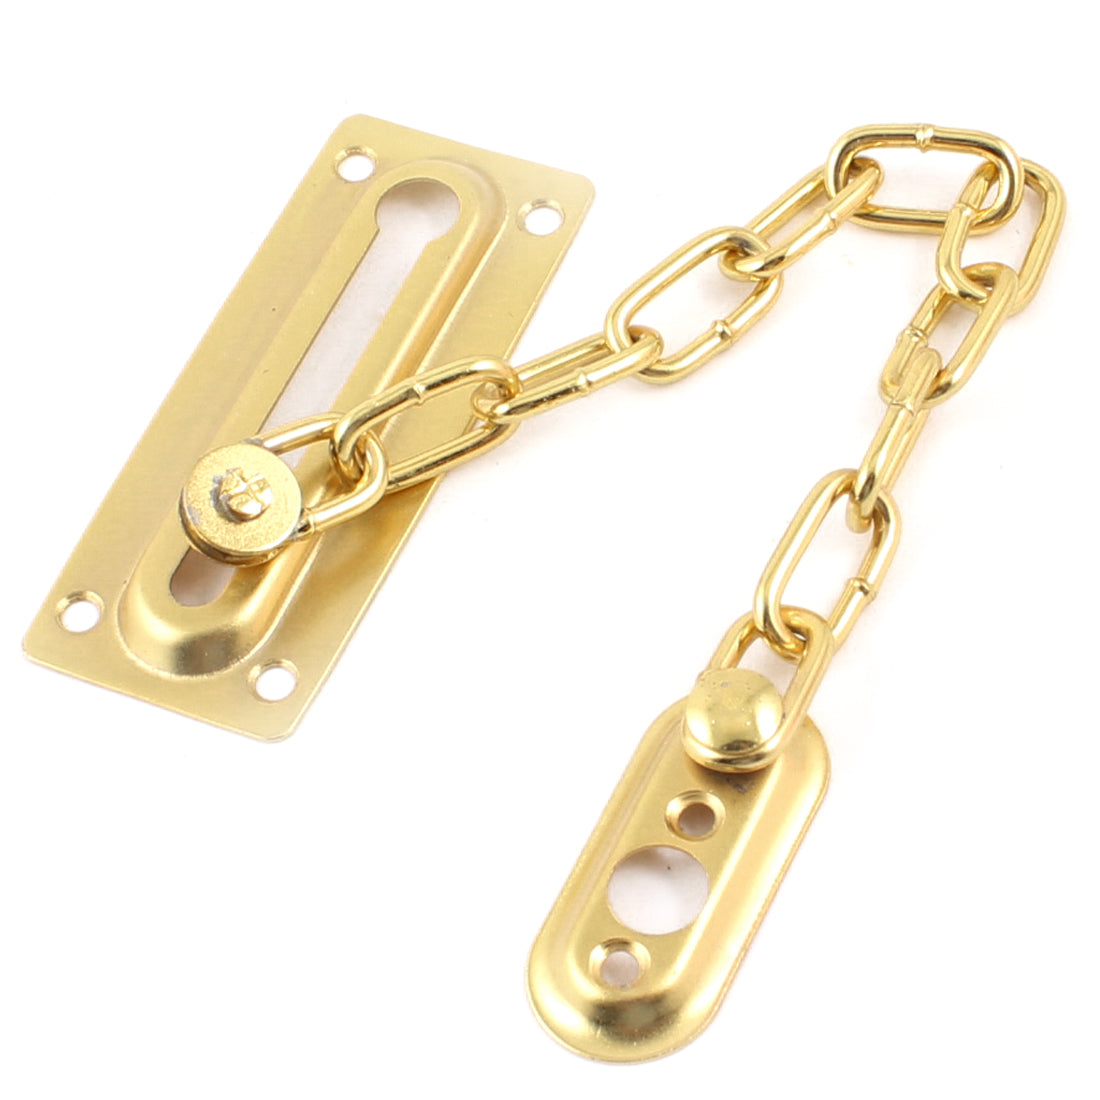 uxcell Uxcell Hotel Security Hardware Door Locking Chain Guard Dhyol Gold Tone